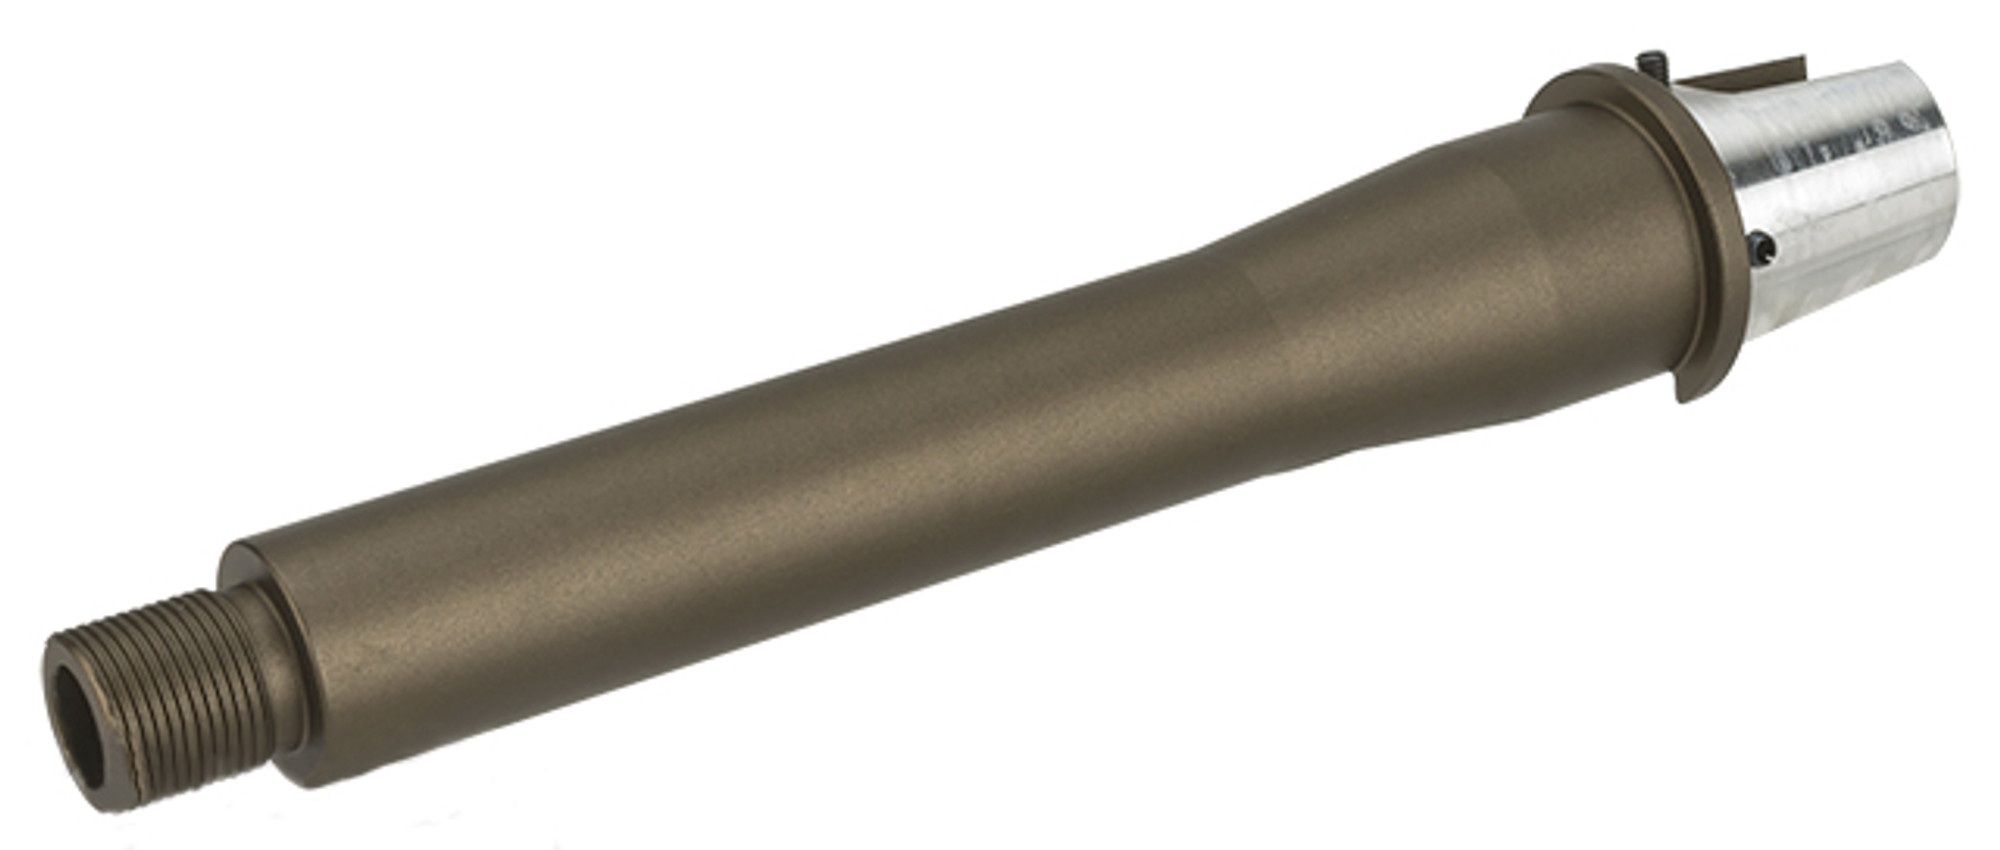 G&P Tapered 6.5" Tank Length CNC Aluminum GP-T Outer Barrel for G&P GP-T AEG Receivers - Sand